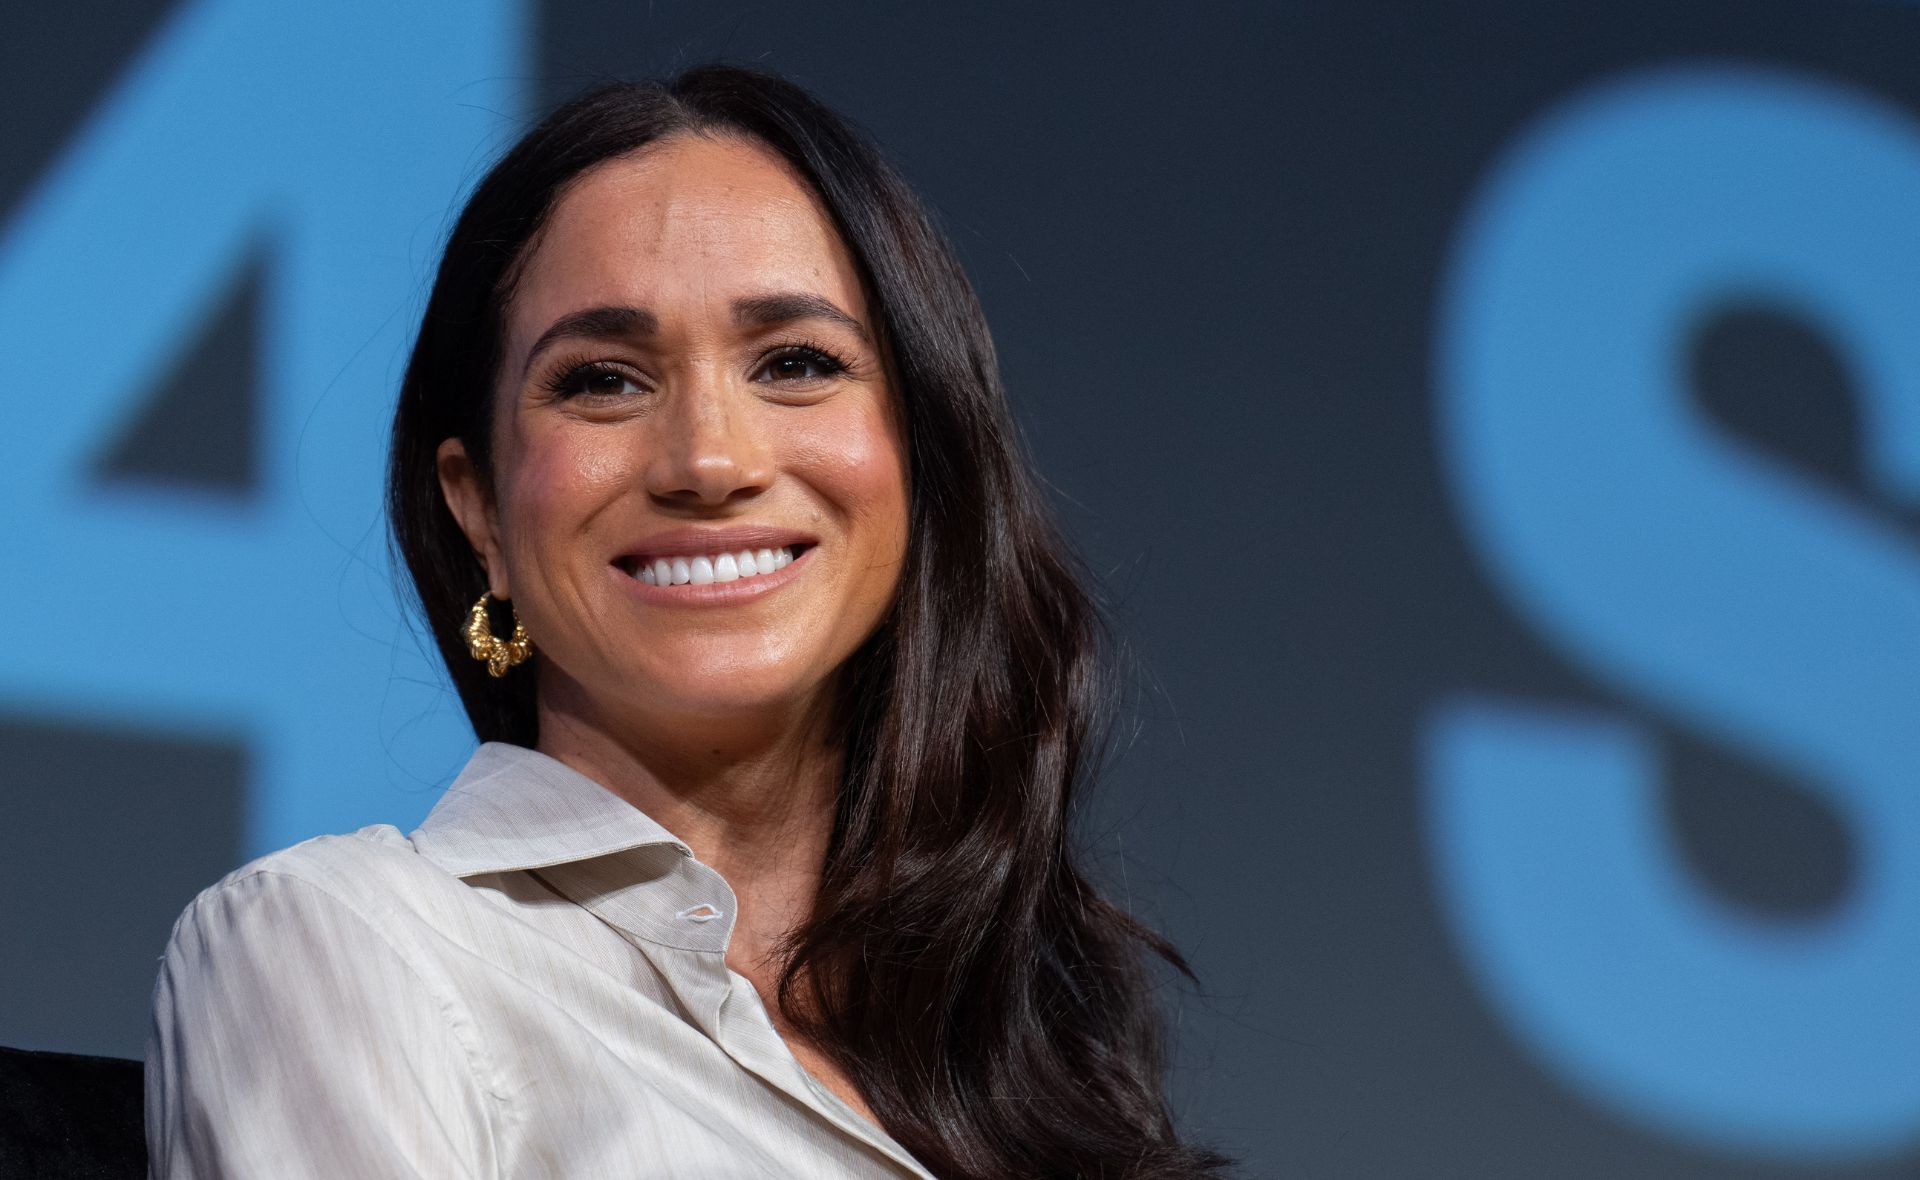 Meghan Markle has wrapped up filming on her new Netflix cooking show